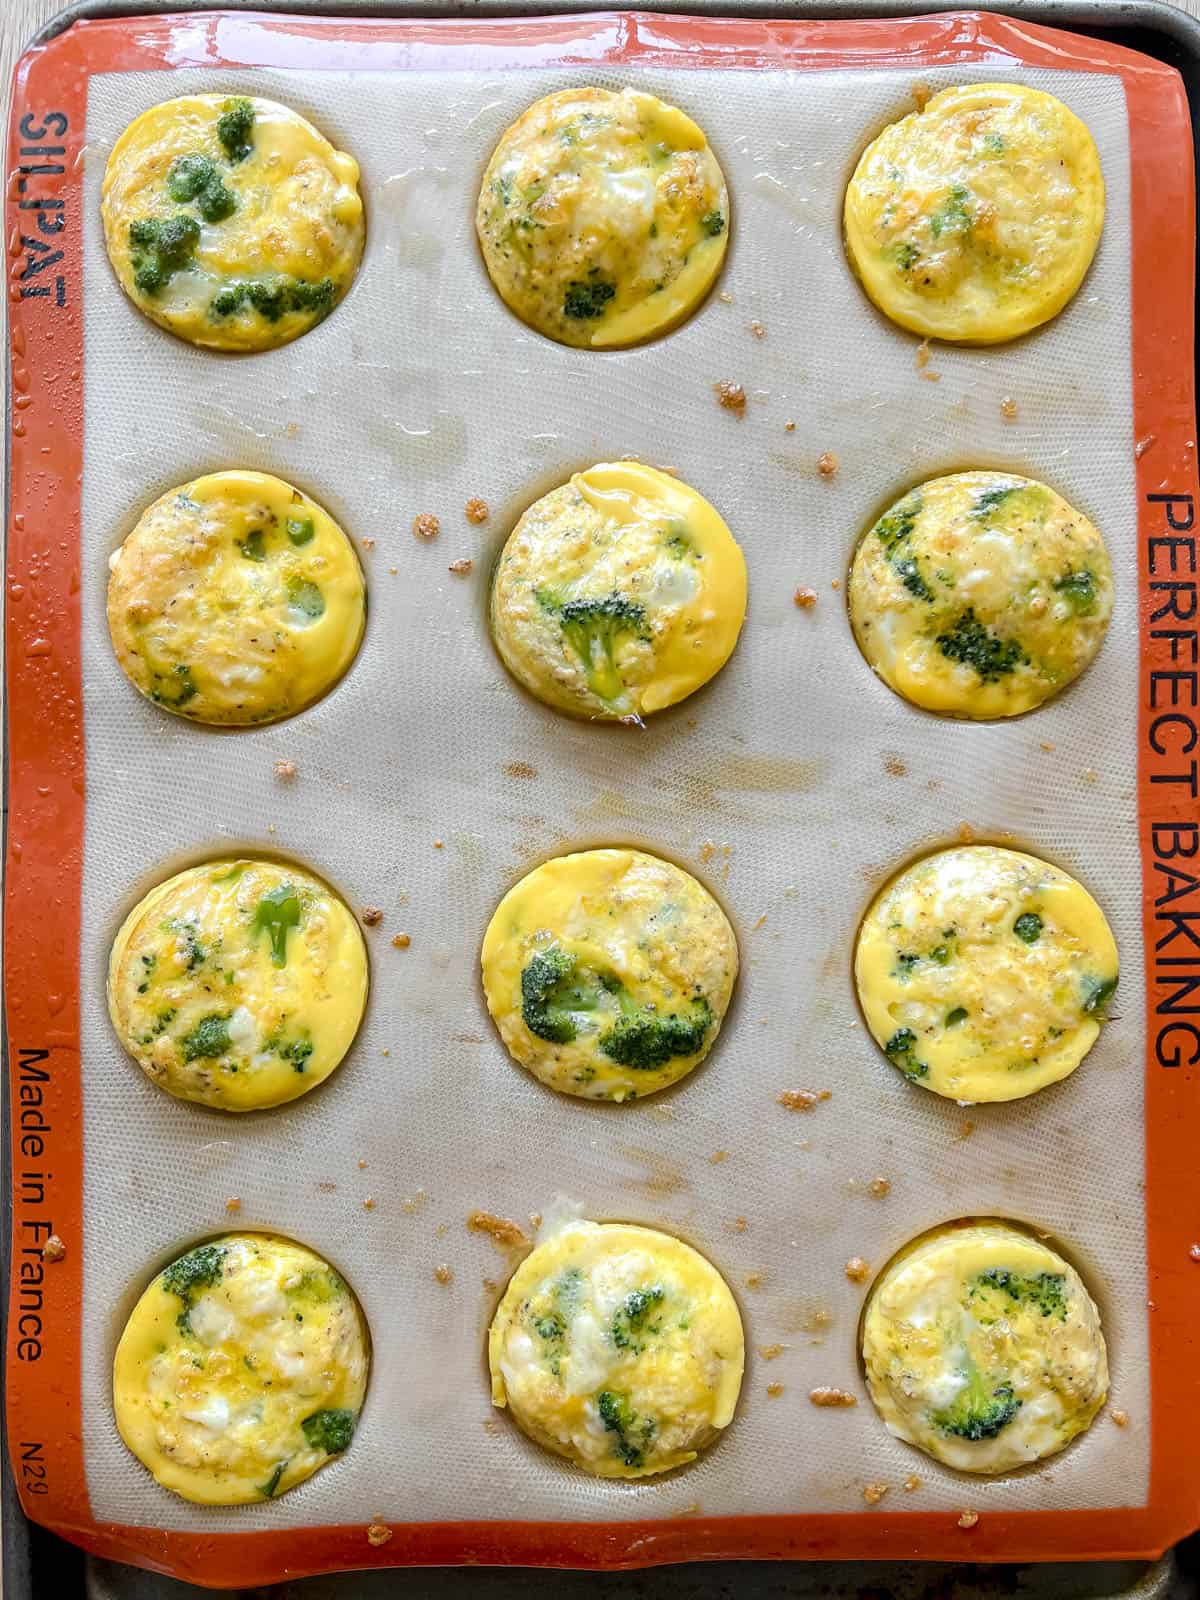 Freshly baked broccoli cheddar egg muffins in silicone tins.